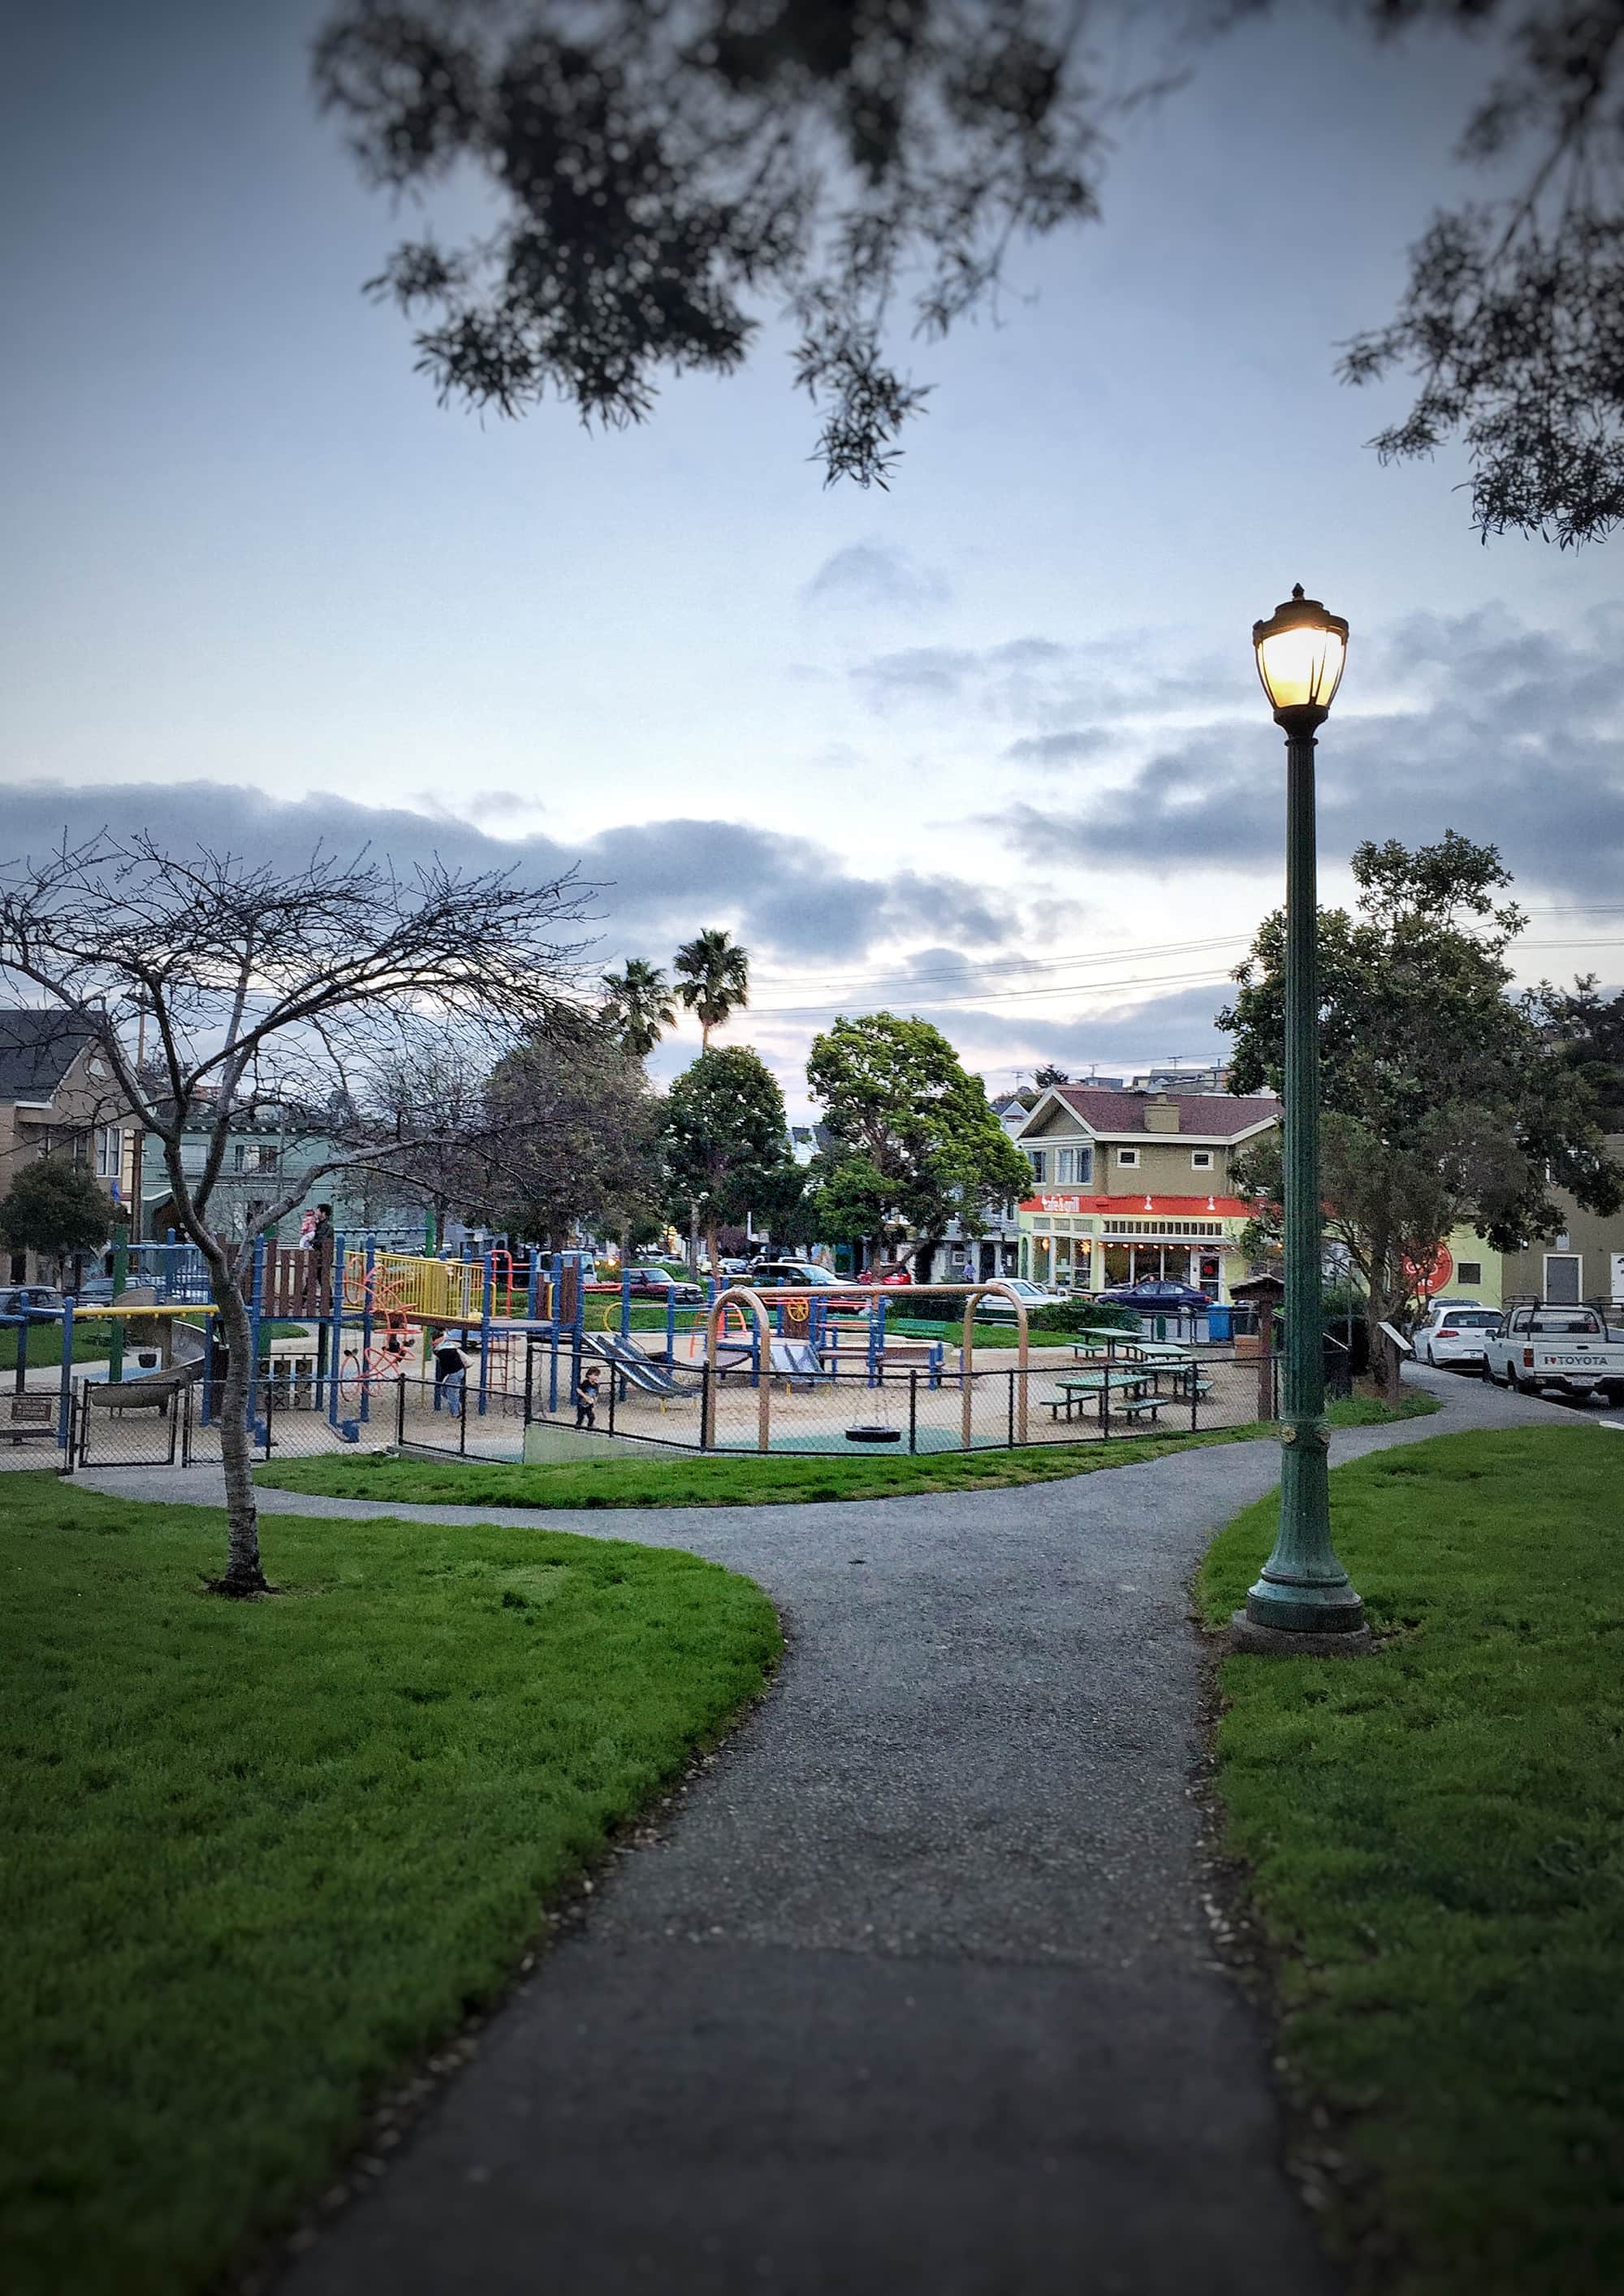 Precita Park vs. Holly Park: Which is Better for Kids?